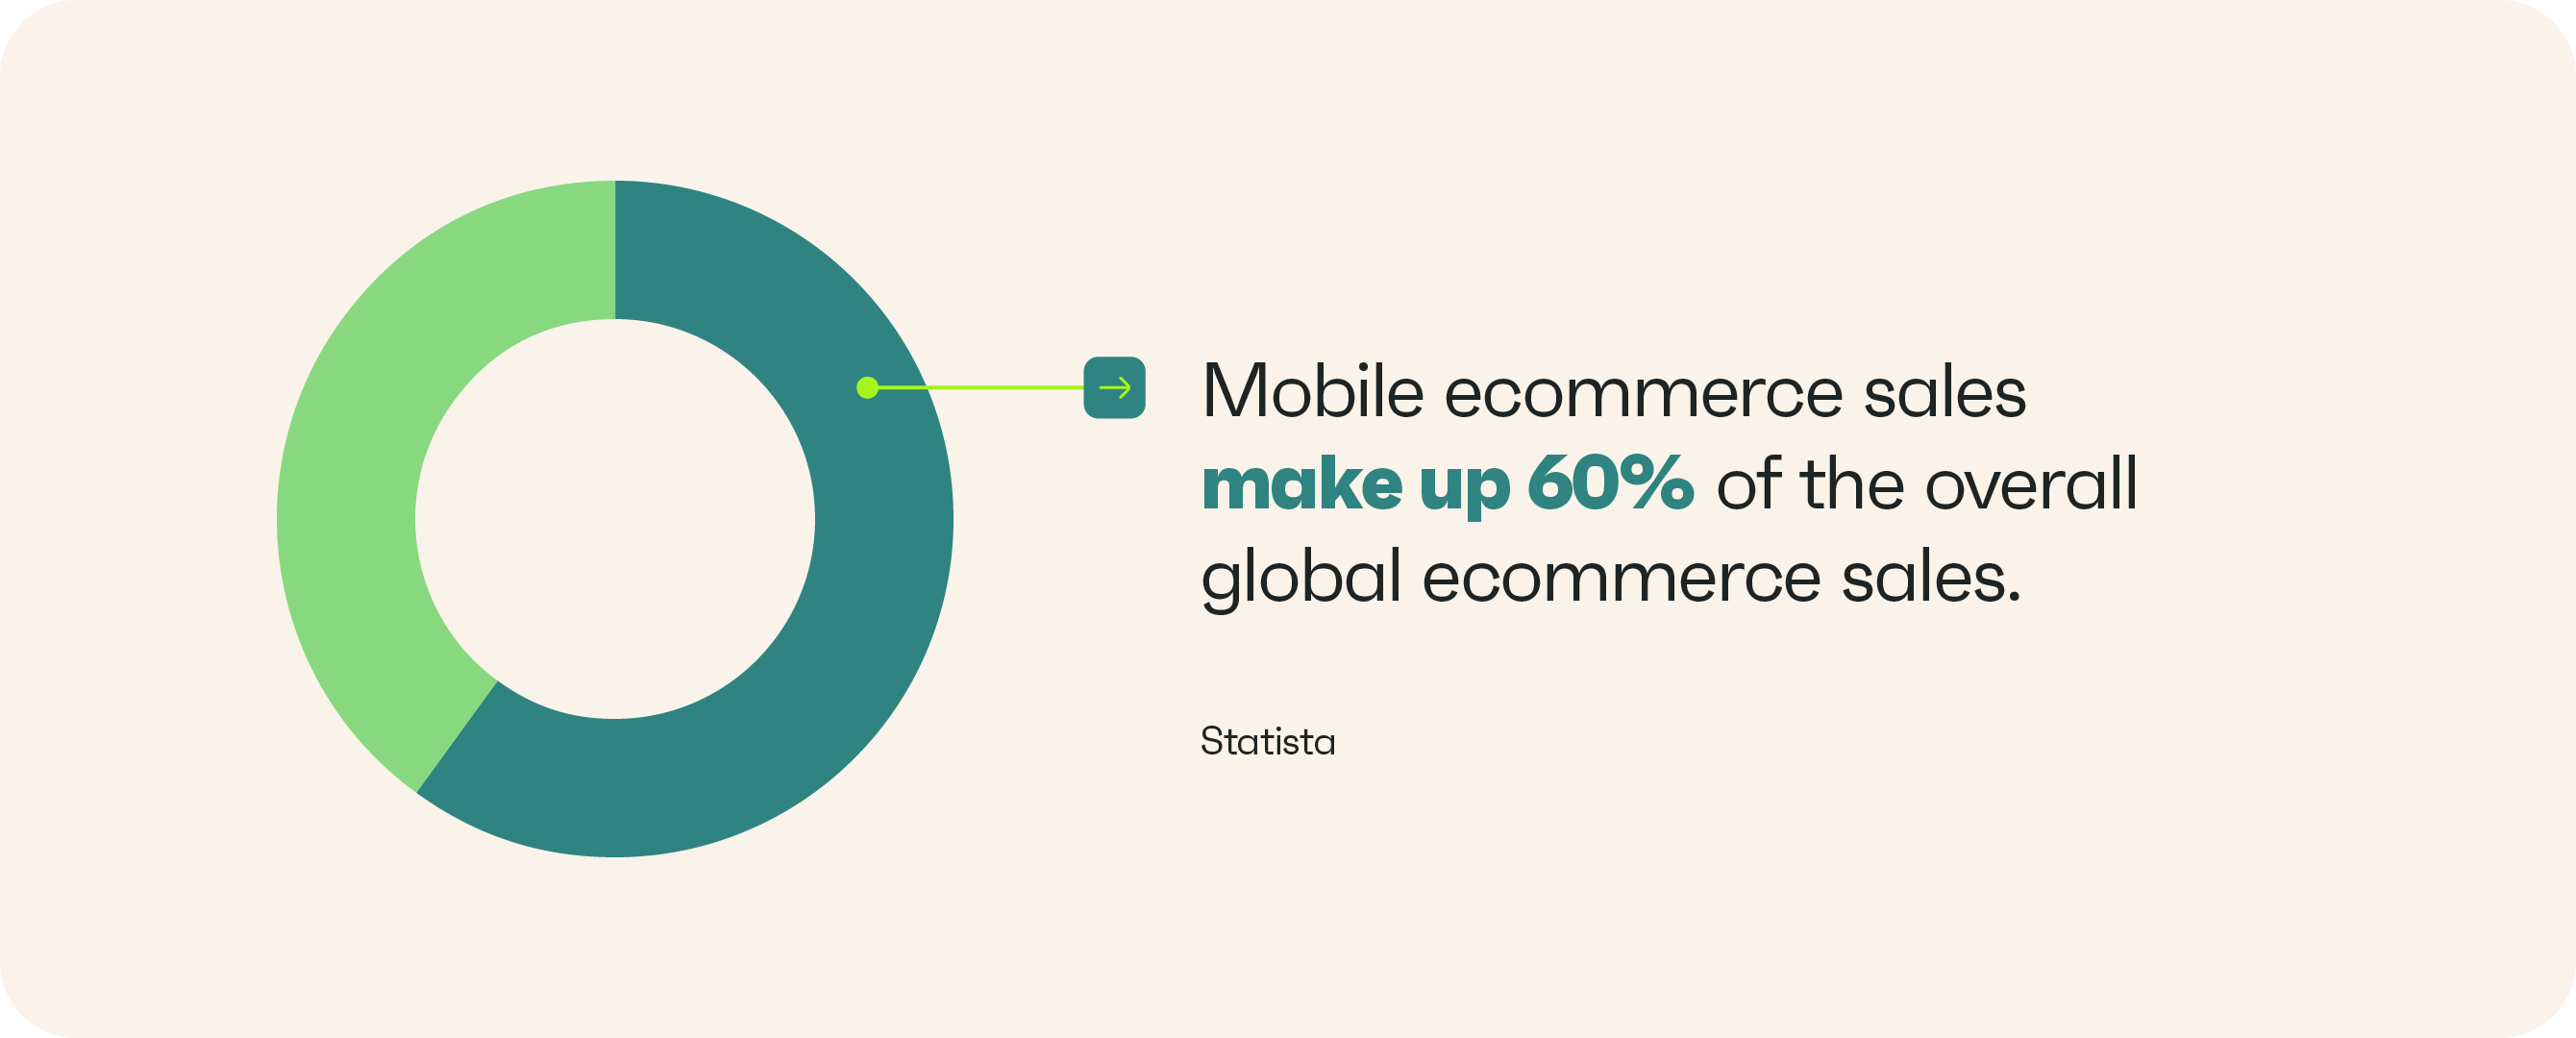 Mobile ecommerce sales make up 60% of the overall global ecommerce sales